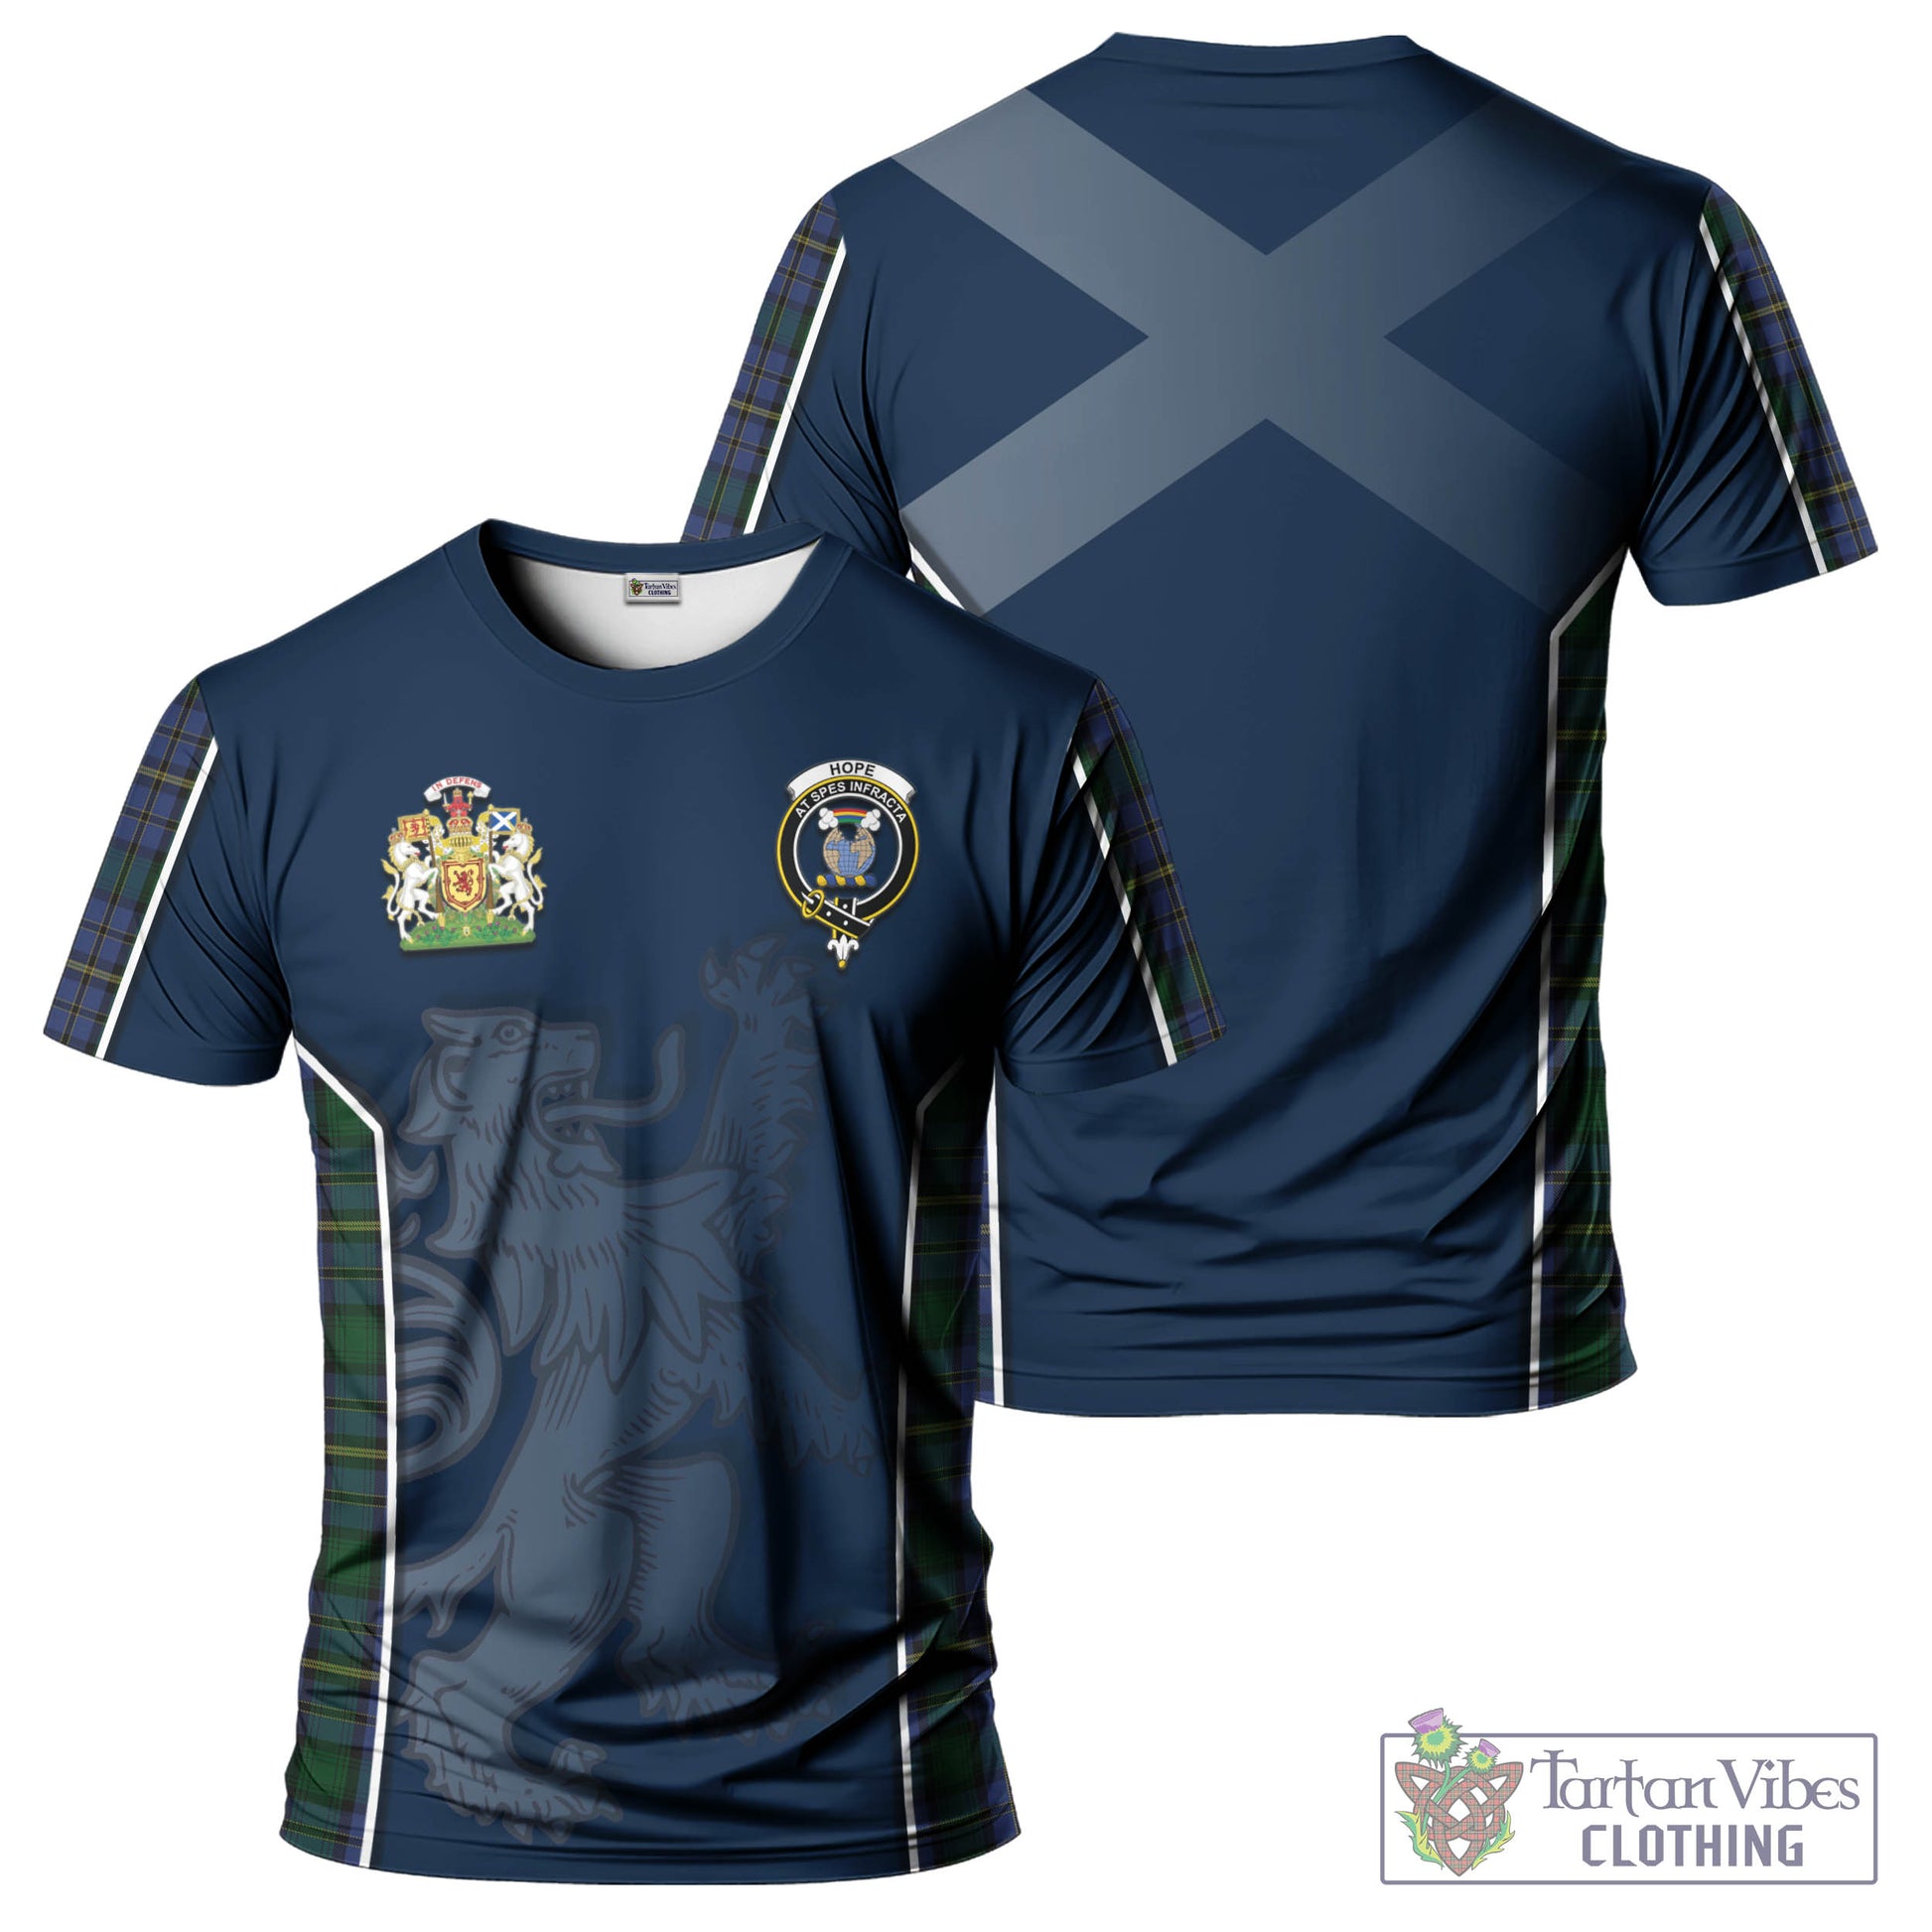 Tartan Vibes Clothing Hope Clan Originaux Tartan T-Shirt with Family Crest and Lion Rampant Vibes Sport Style